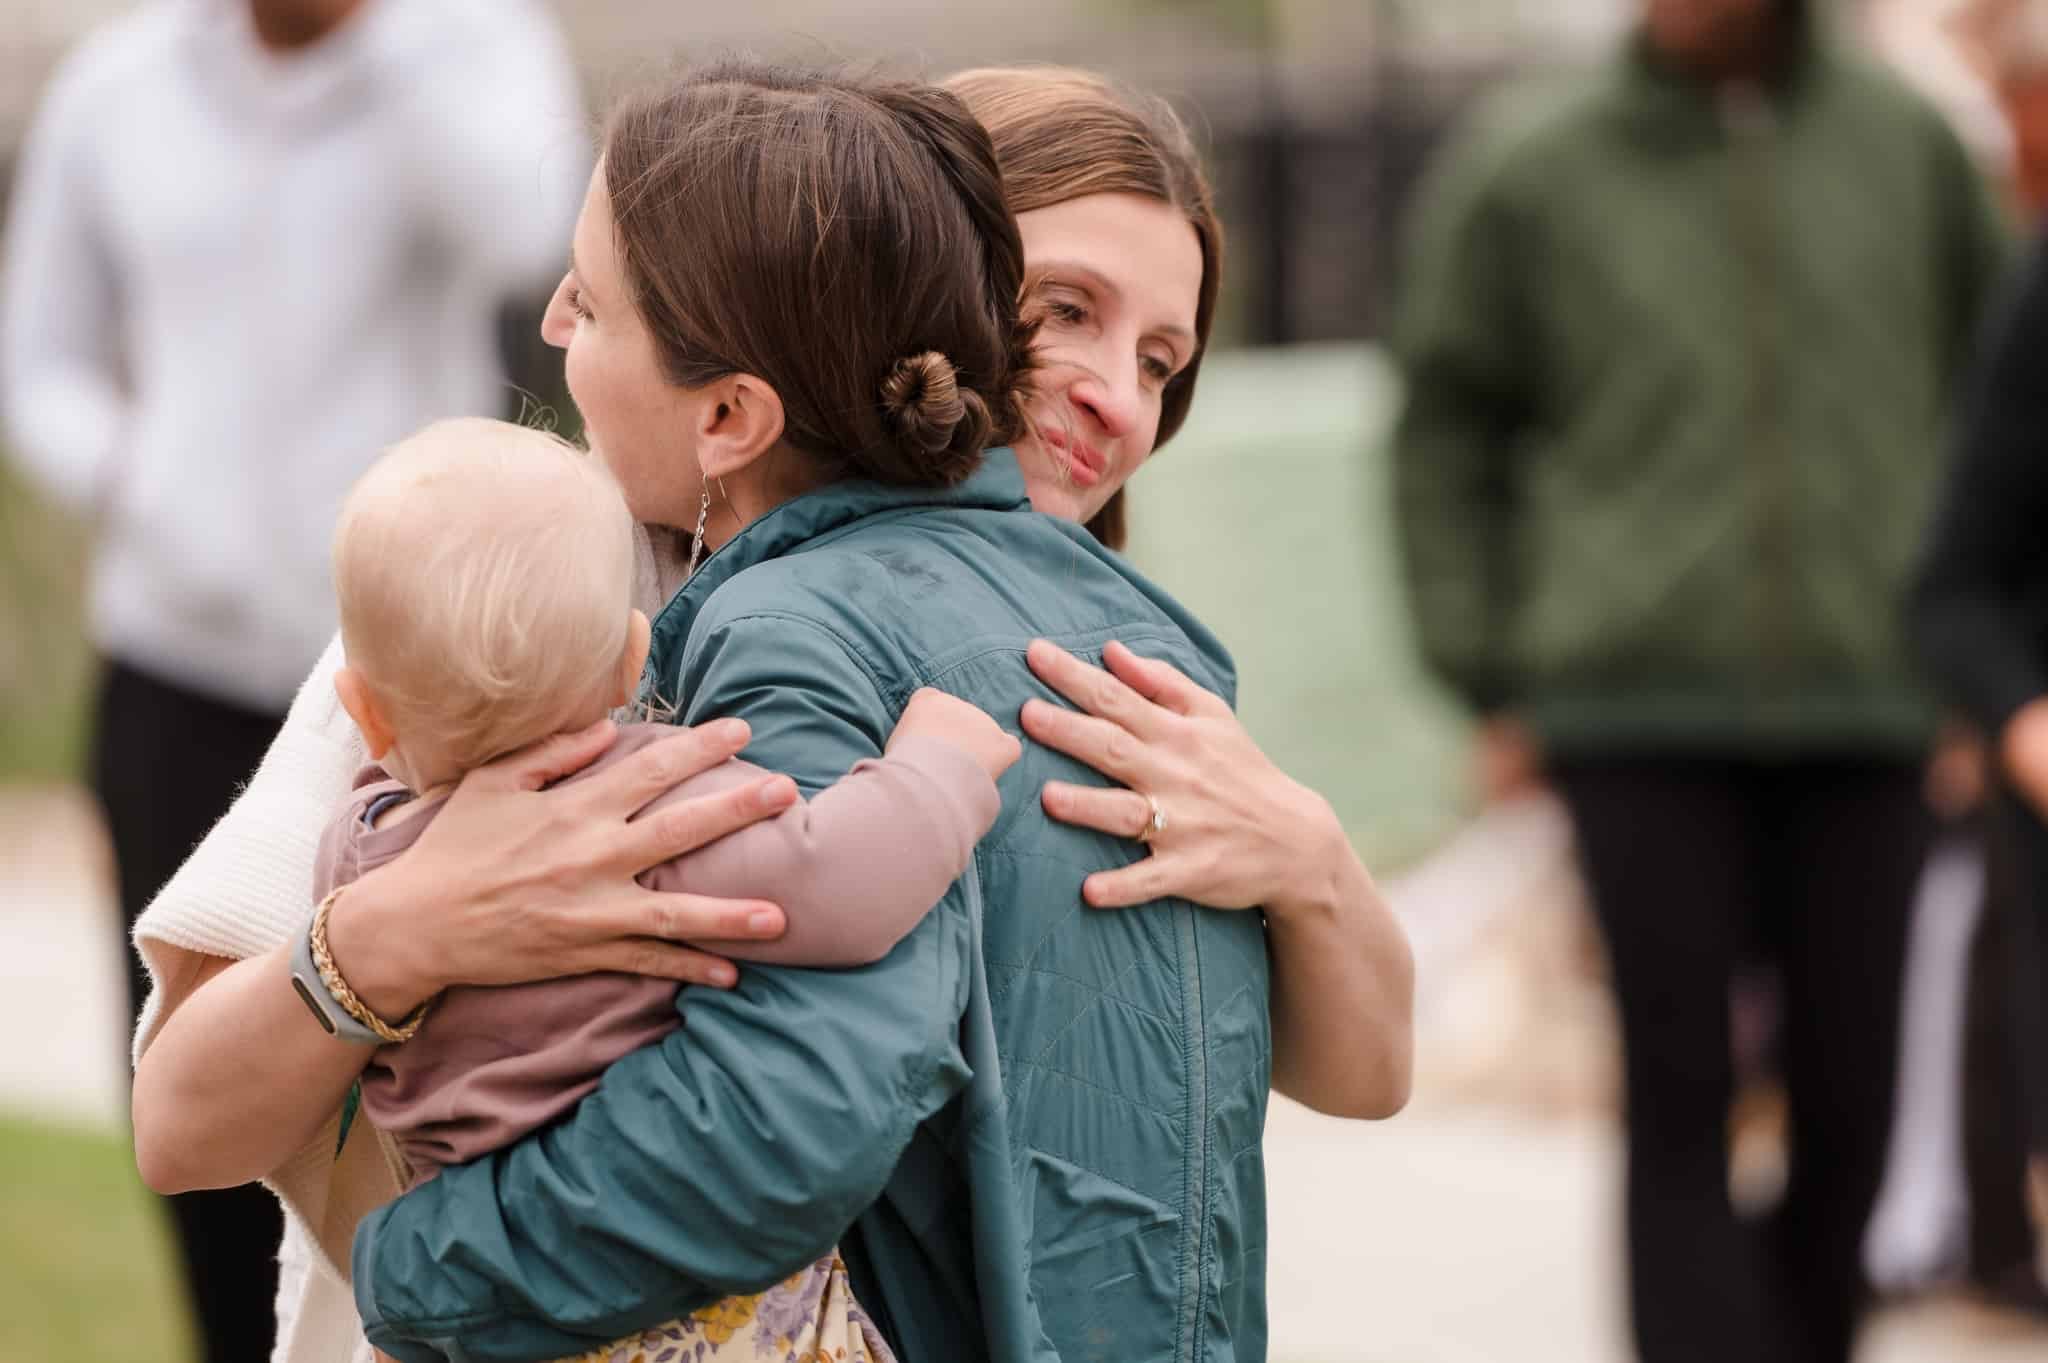 Two women and a baby give each other a hug during an emotional moment at a going away party.